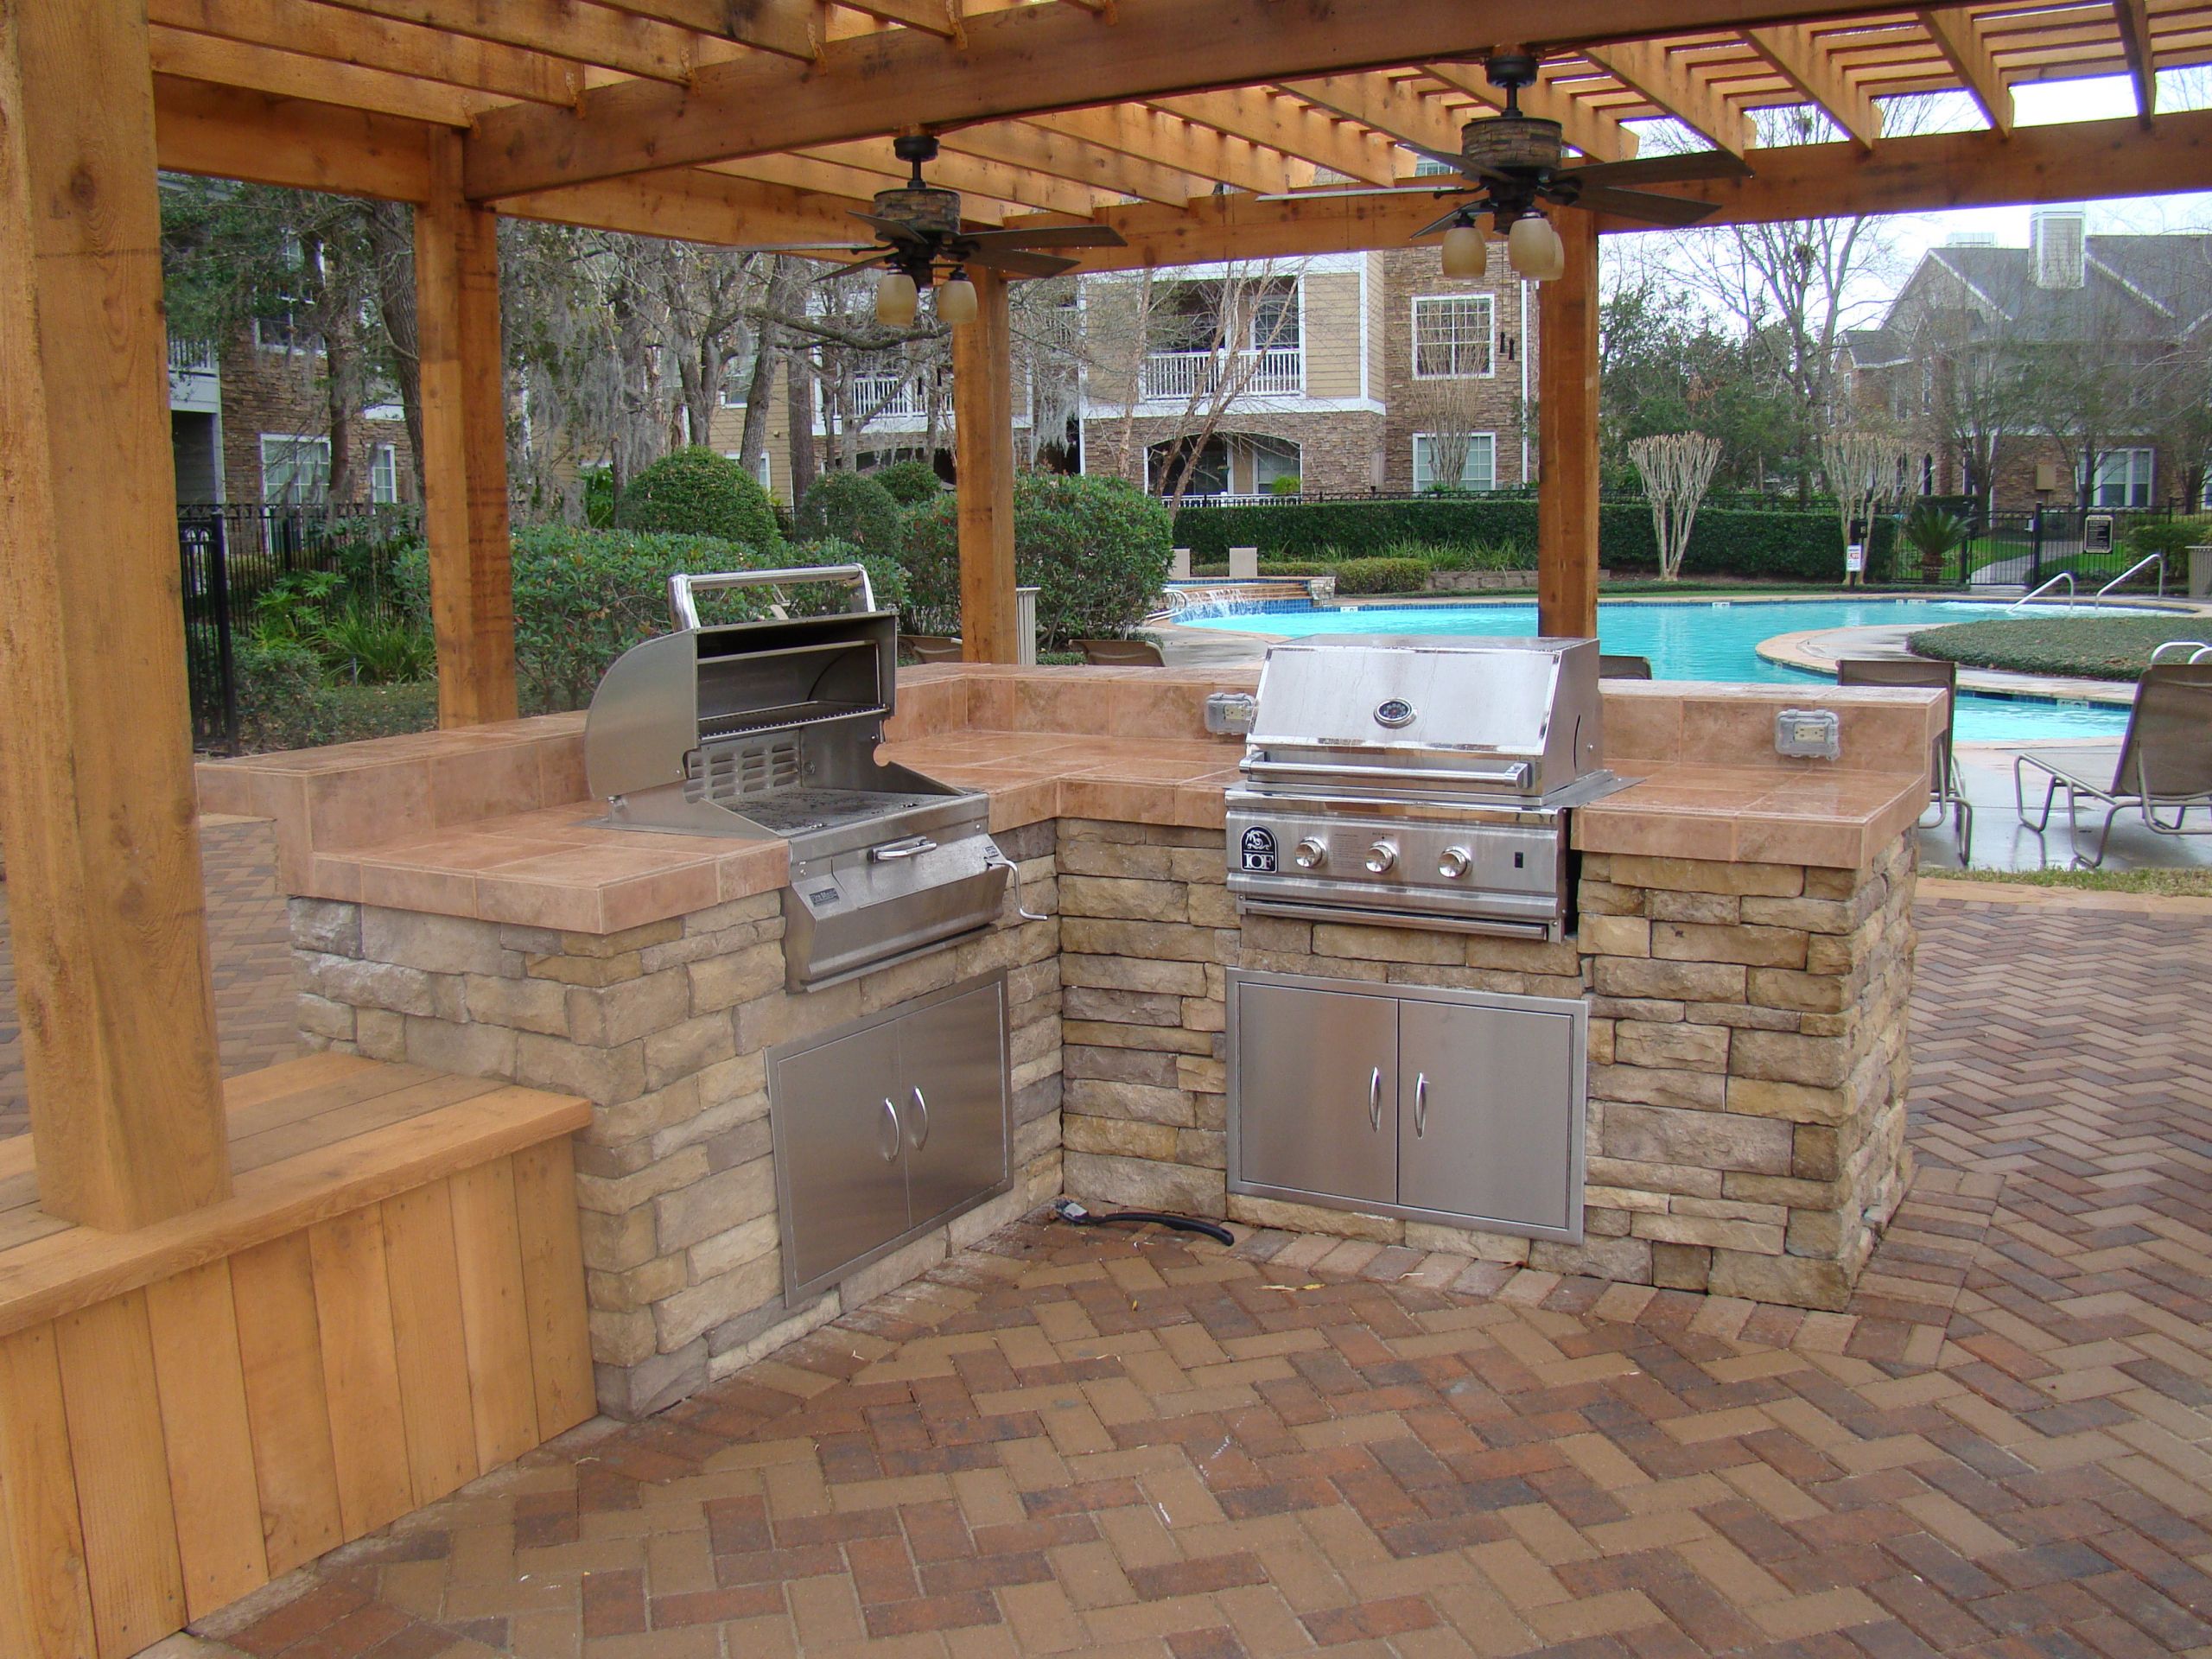 Grill For Outdoor Kitchen Unique Outdoor Kitchens And Grills Seattle Brickmaster Of Grill For Outdoor Kitchen Scaled 